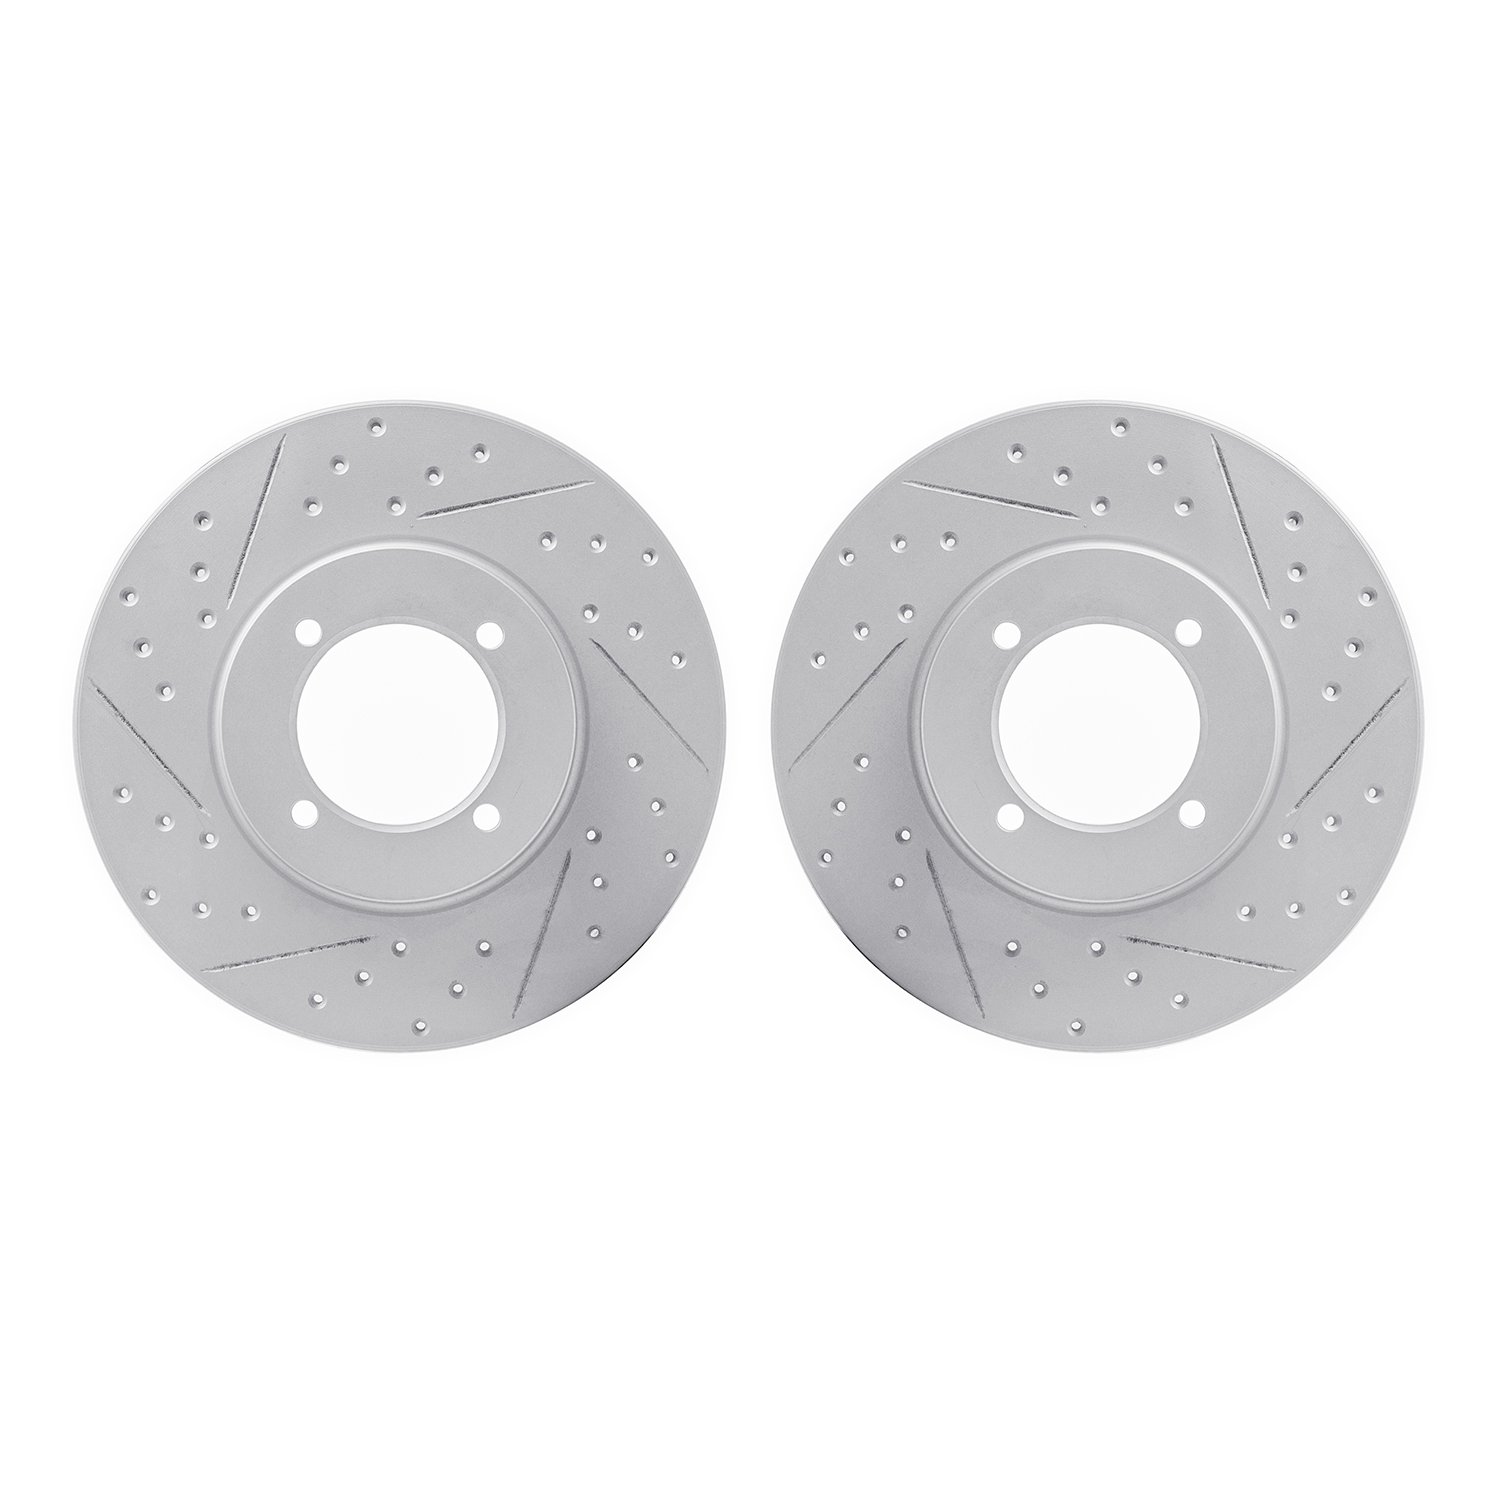 2002-67016 Geoperformance Drilled/Slotted Brake Rotors, 1970-1973 Infiniti/Nissan, Position: Front